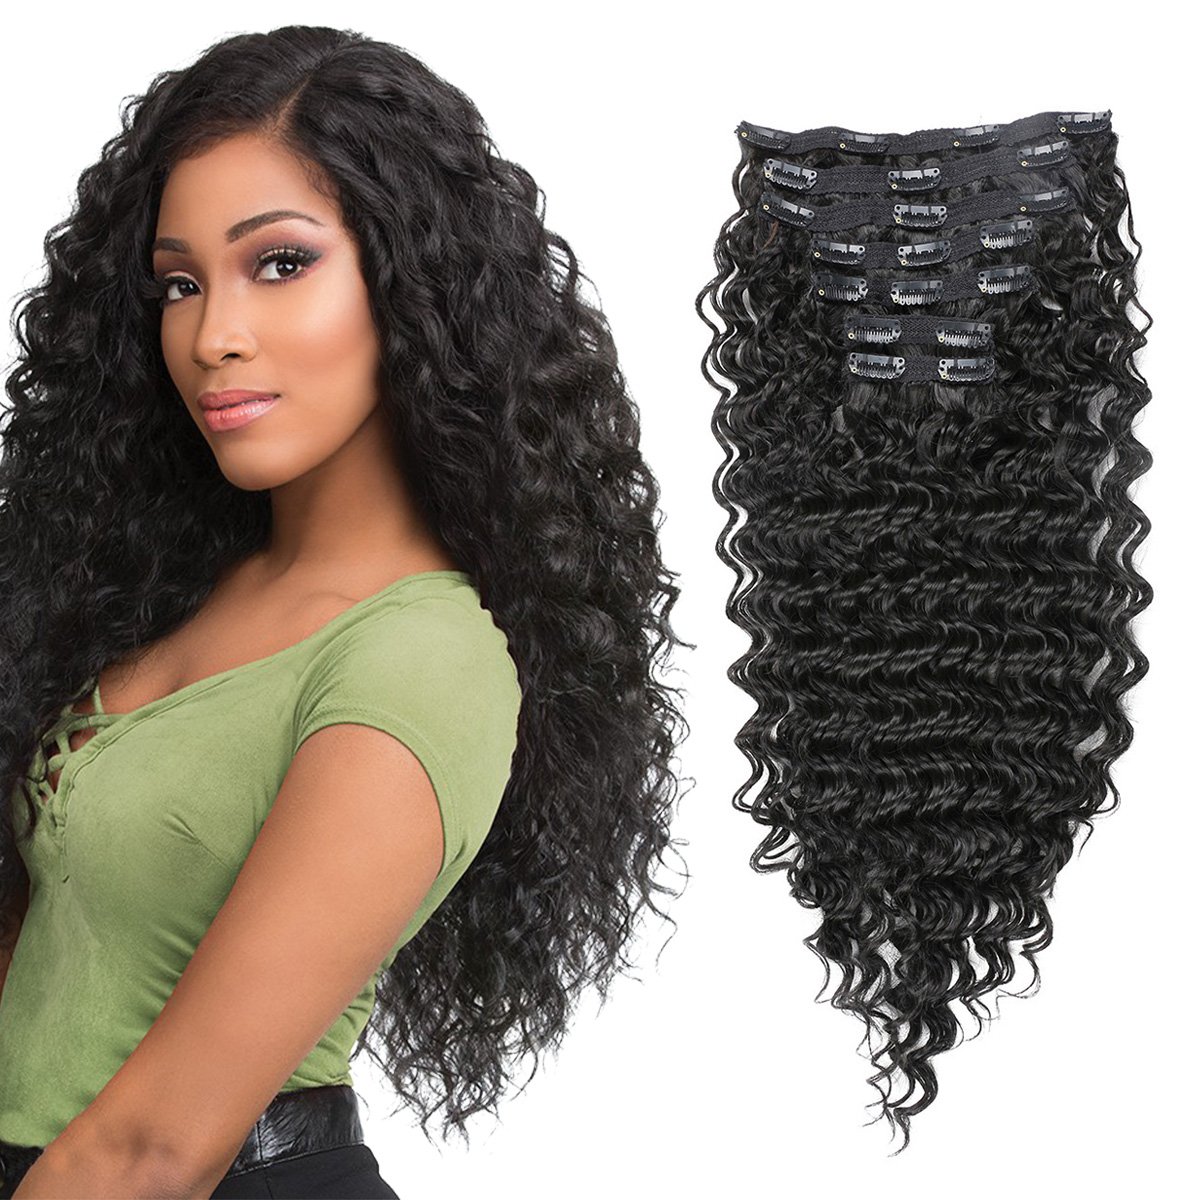  Clip In Hair Extensions 24 Curly Hair Extensions